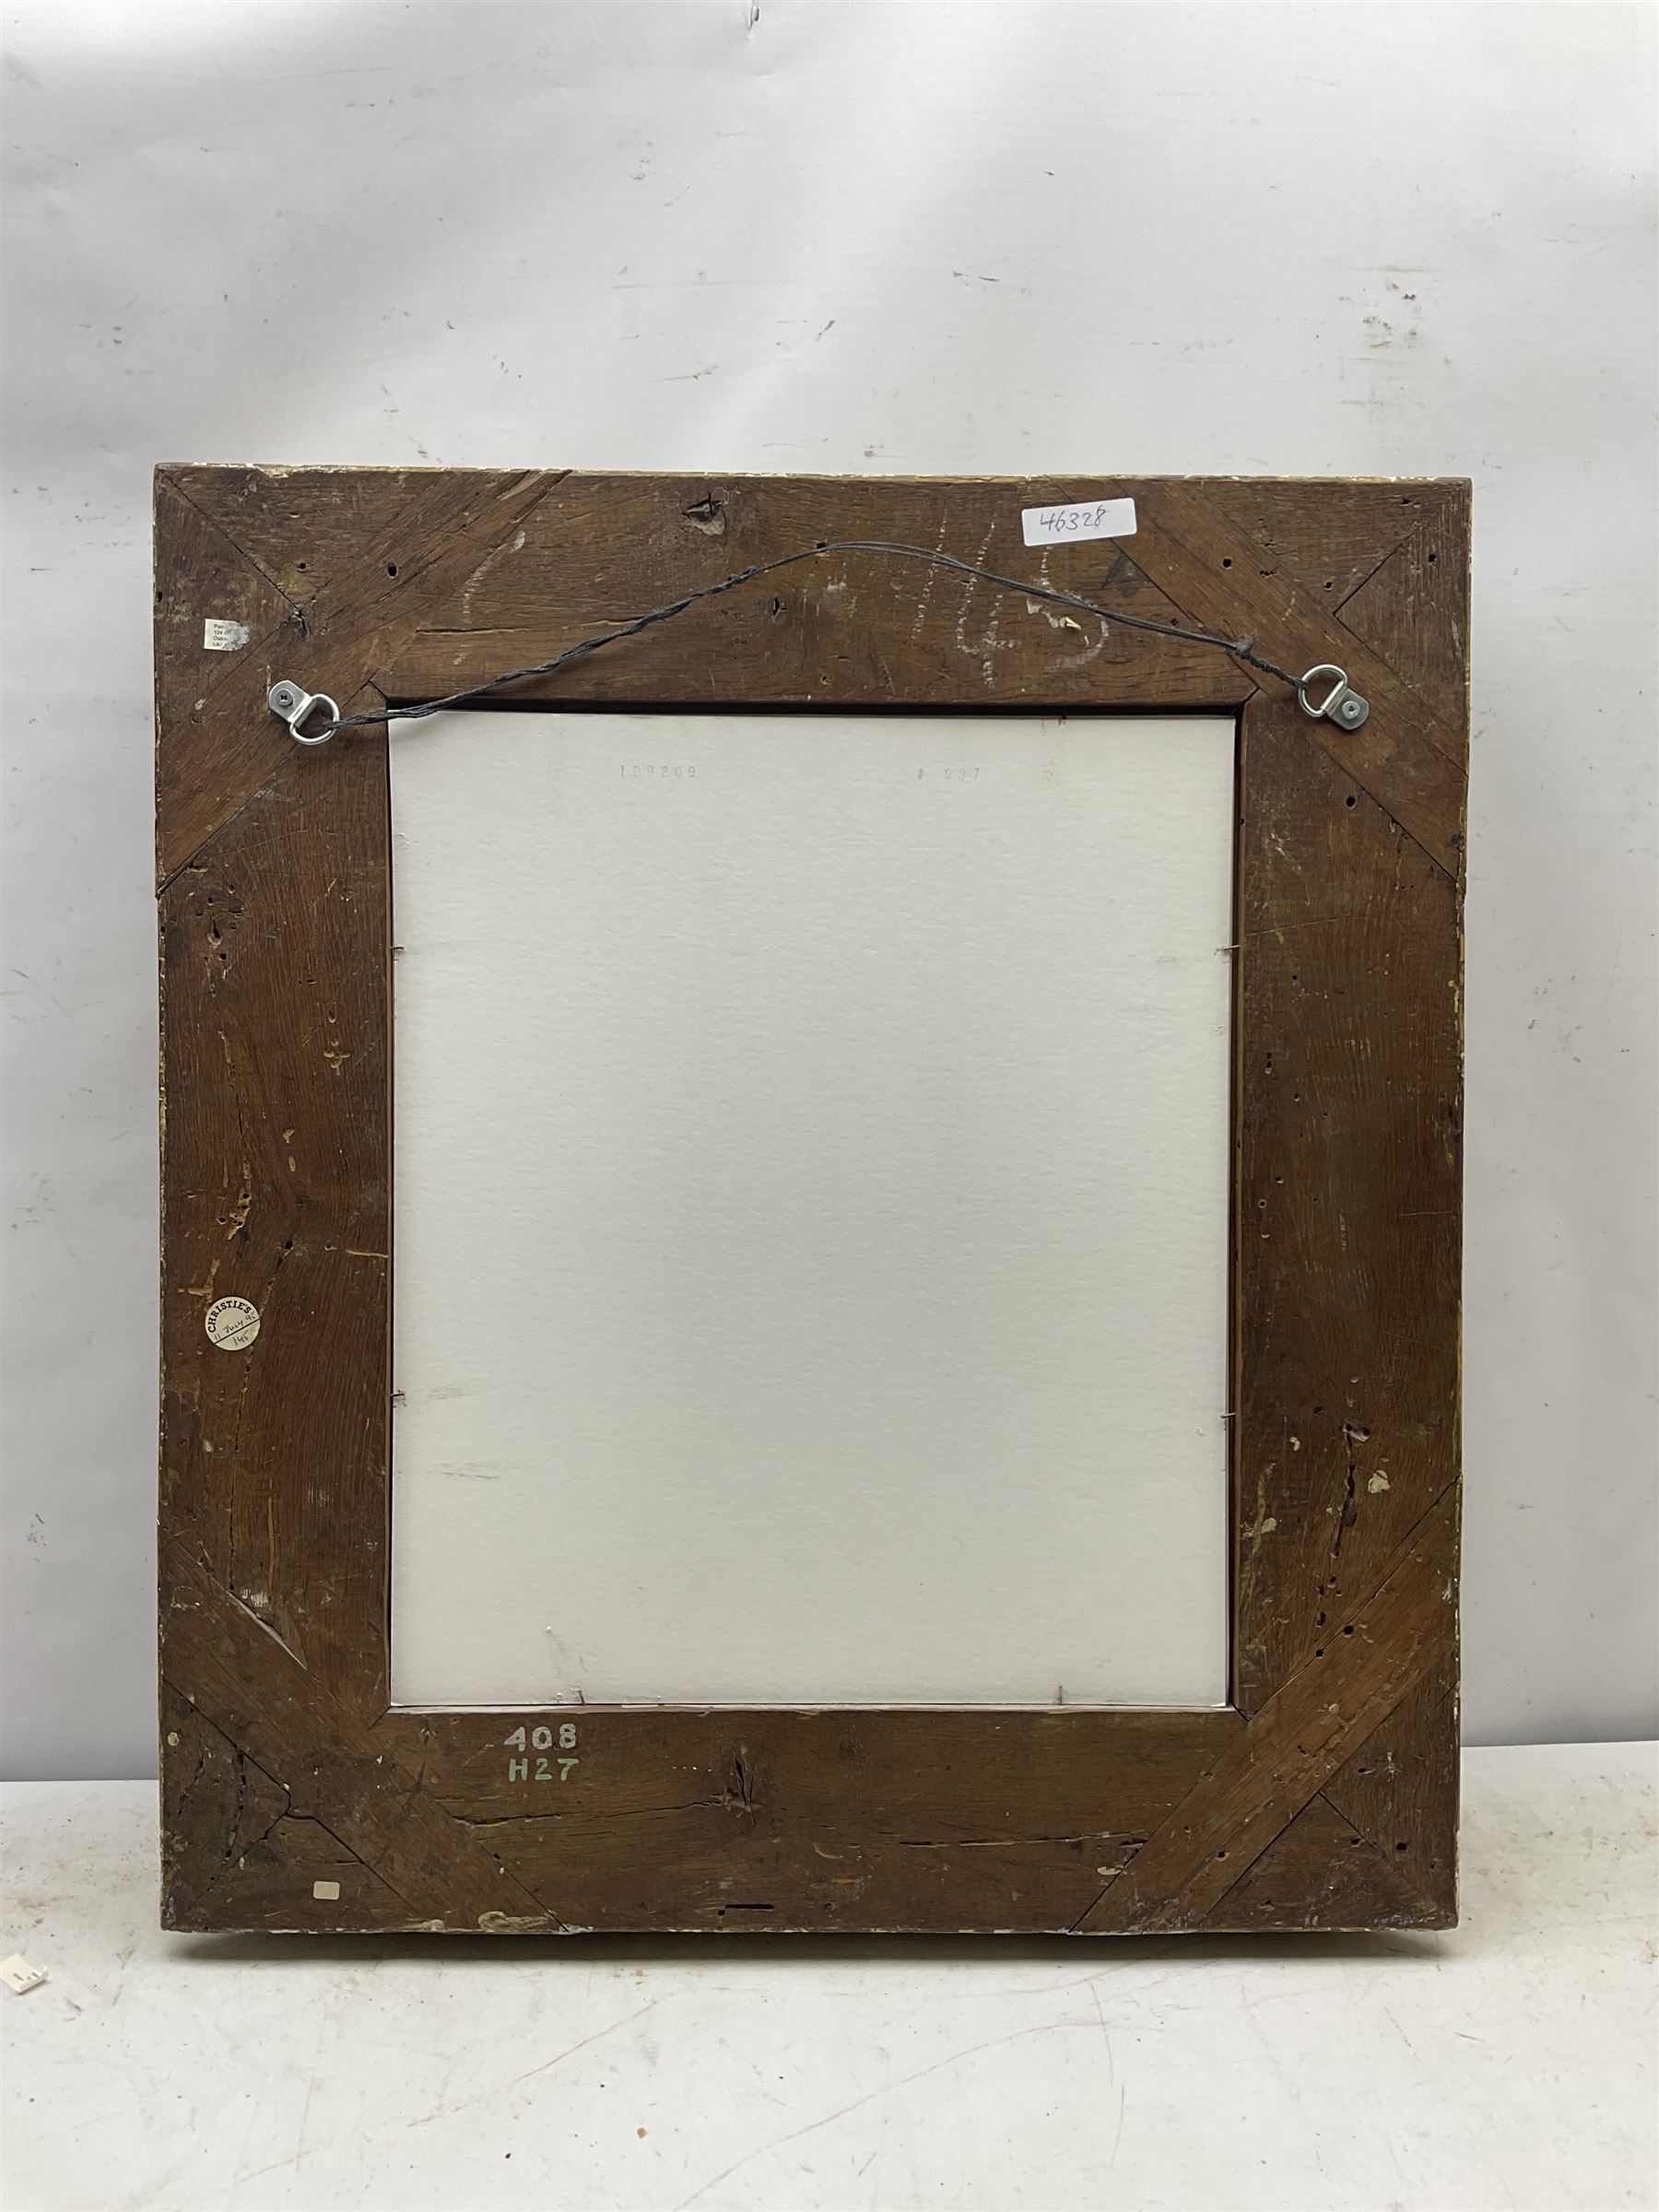 FRAMES - 19th century ornate gilt wood picture frame - Image 3 of 4